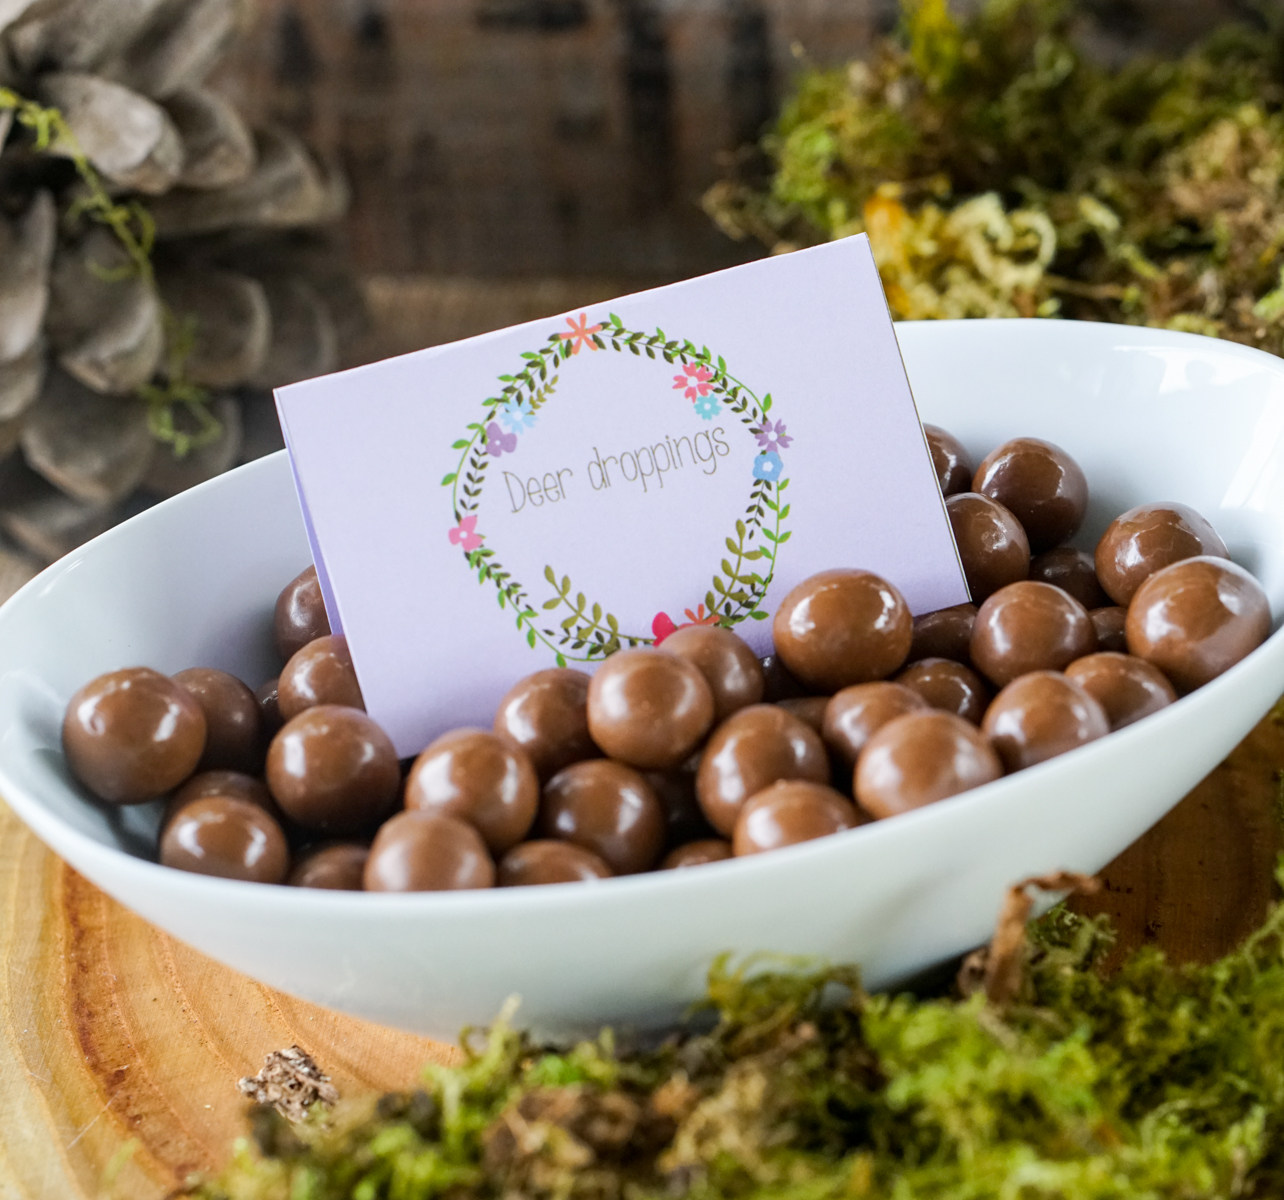 Boho Enchanted Forest Party Food Ideas of chocolate balls as Deer Droppings with a floral wreath food label